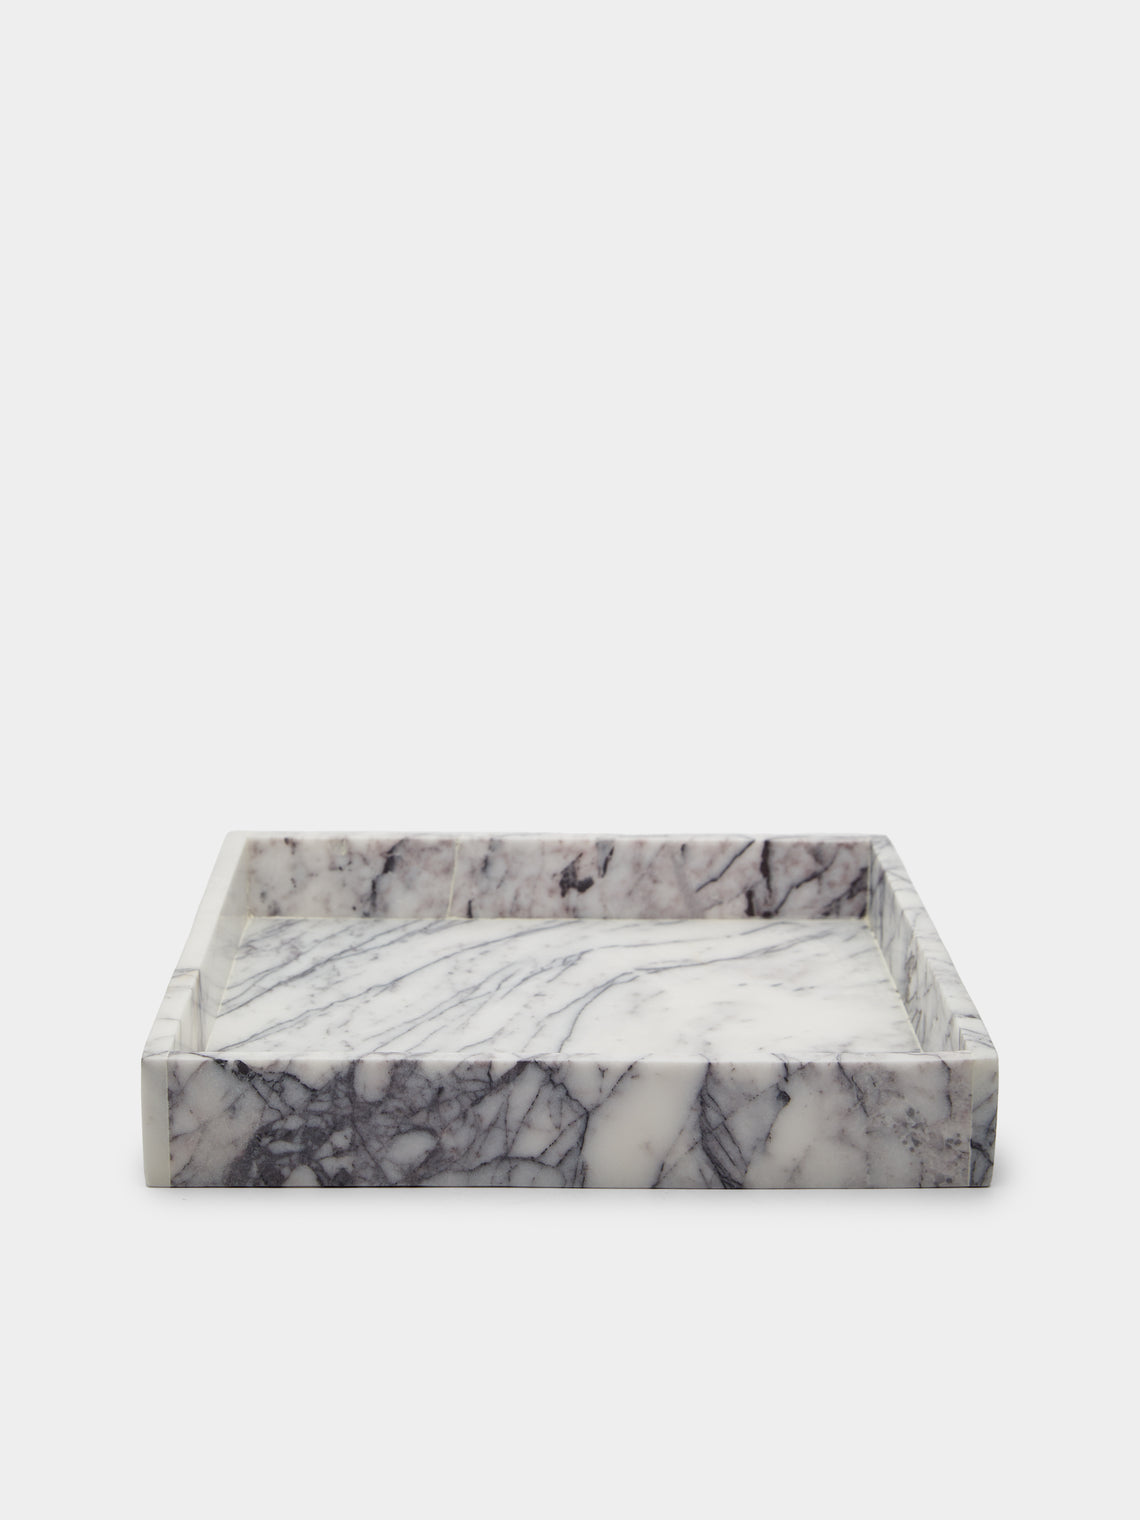 Stoned - Marble Tray -  - ABASK - 